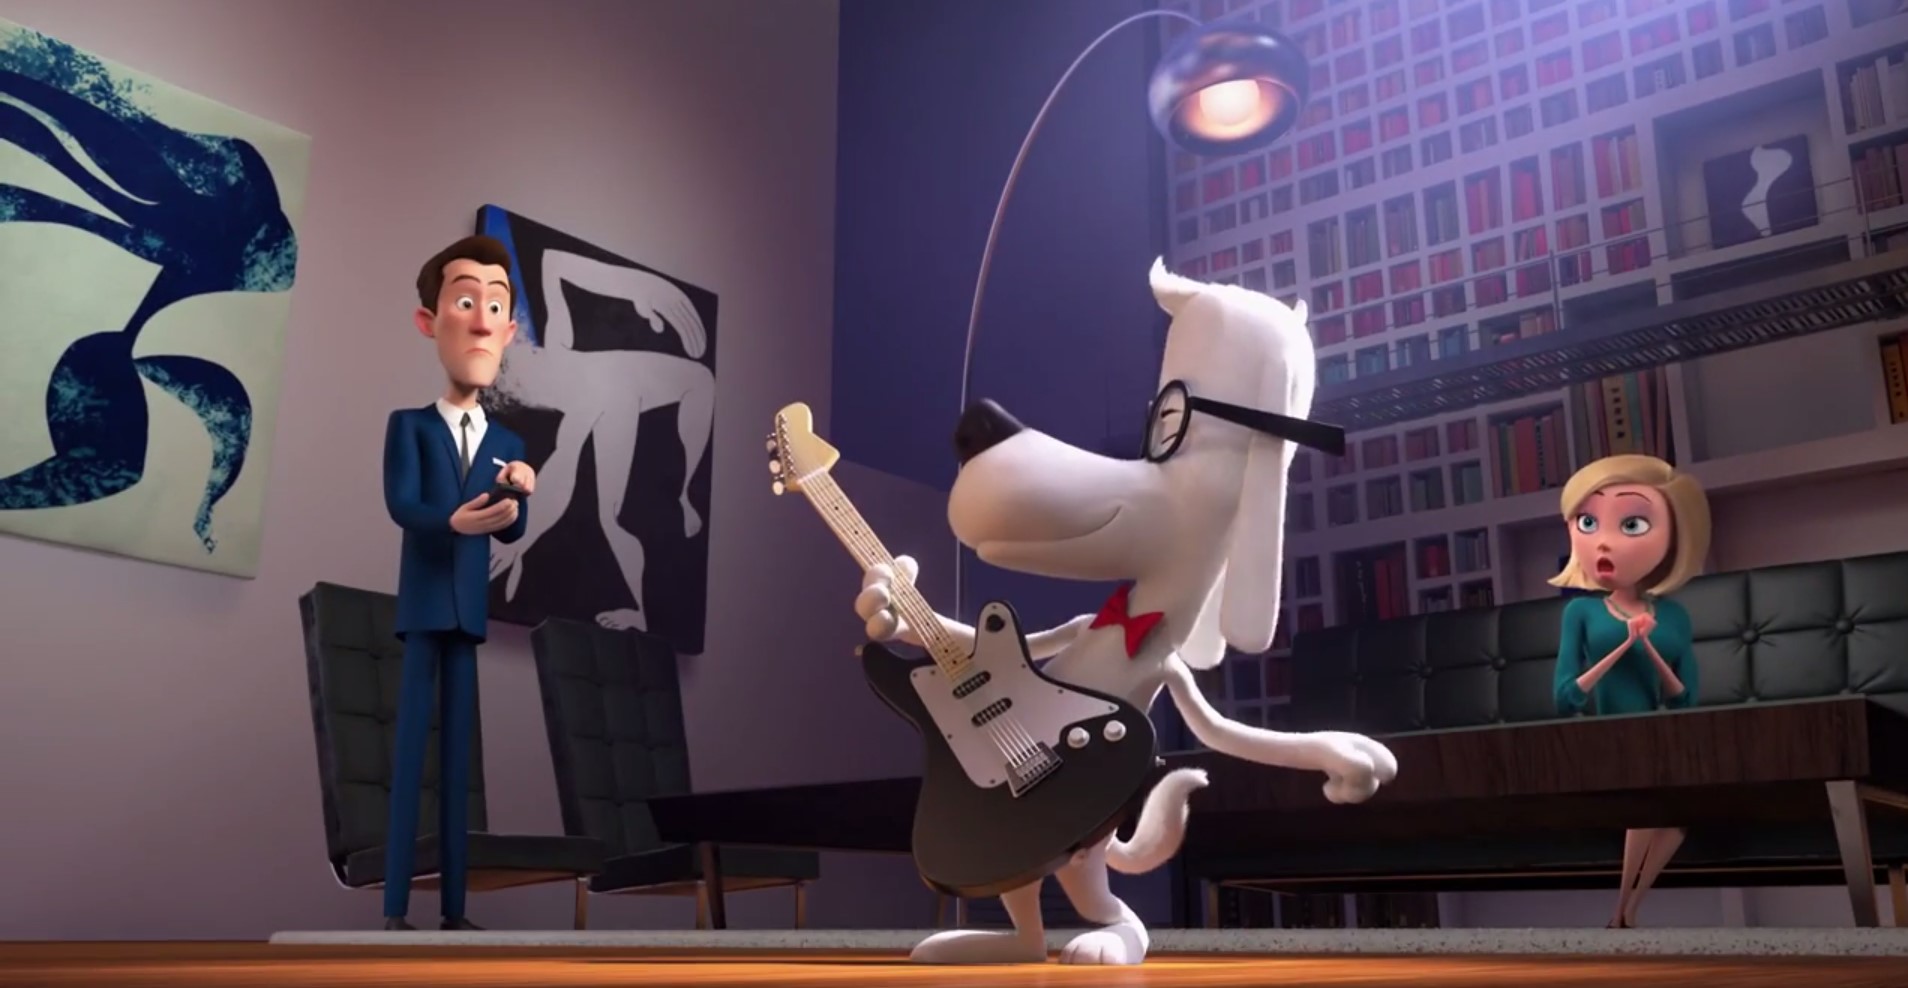 23-facts-about-mr-peabody-the-mr-peabody-sherman-show